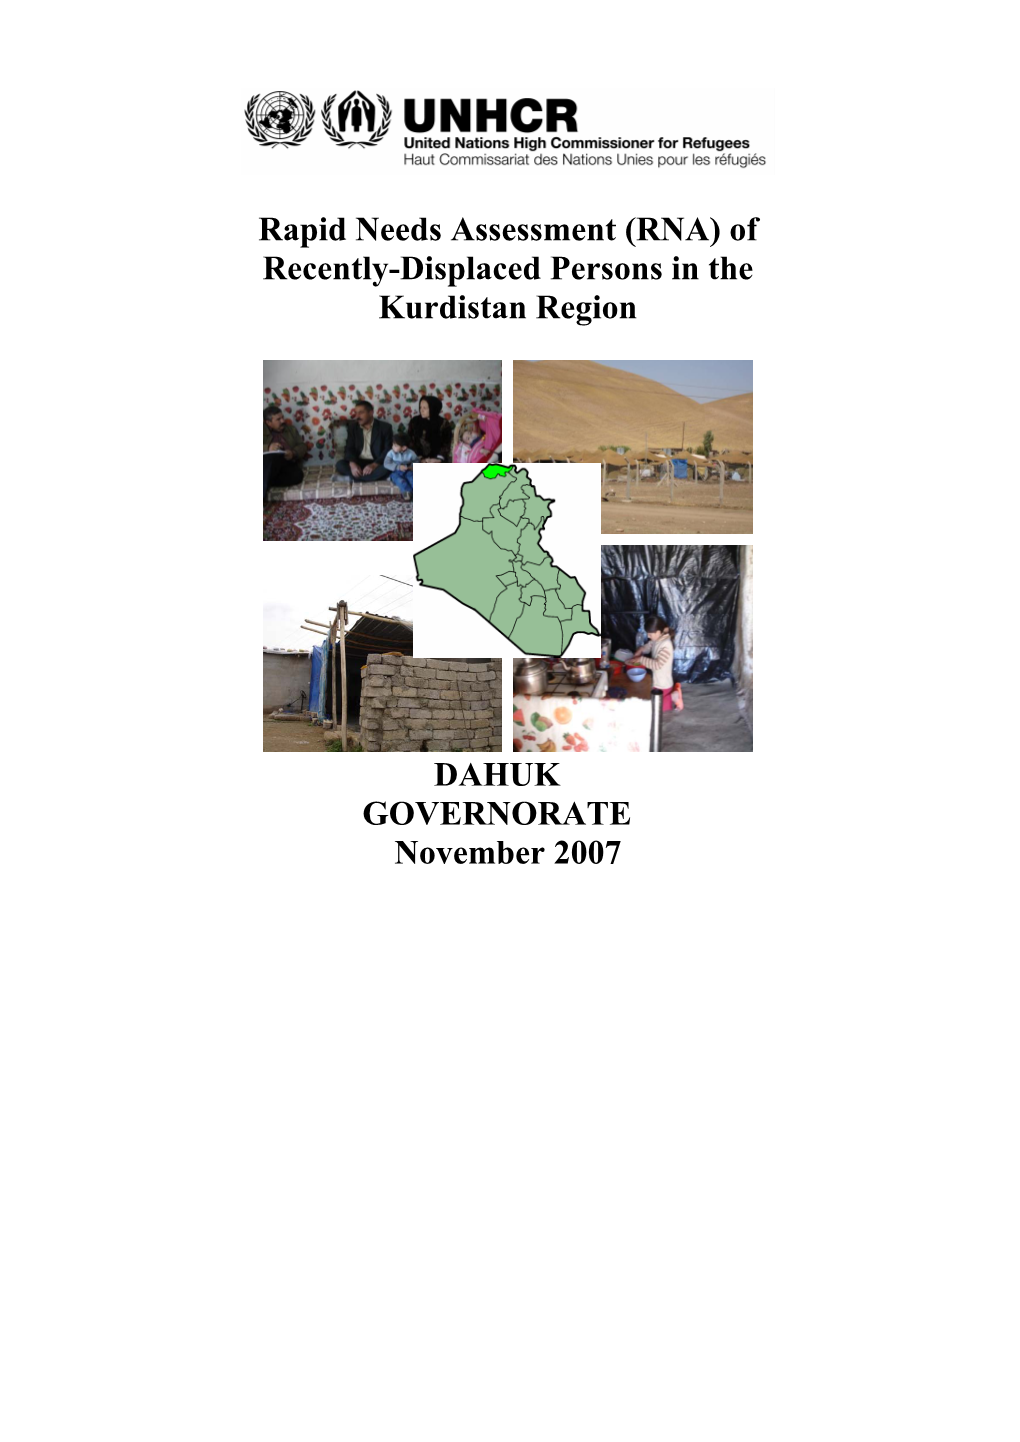 Rapid Needs Assessment (RNA) of Recently-Displaced Persons in the Kurdistan Region